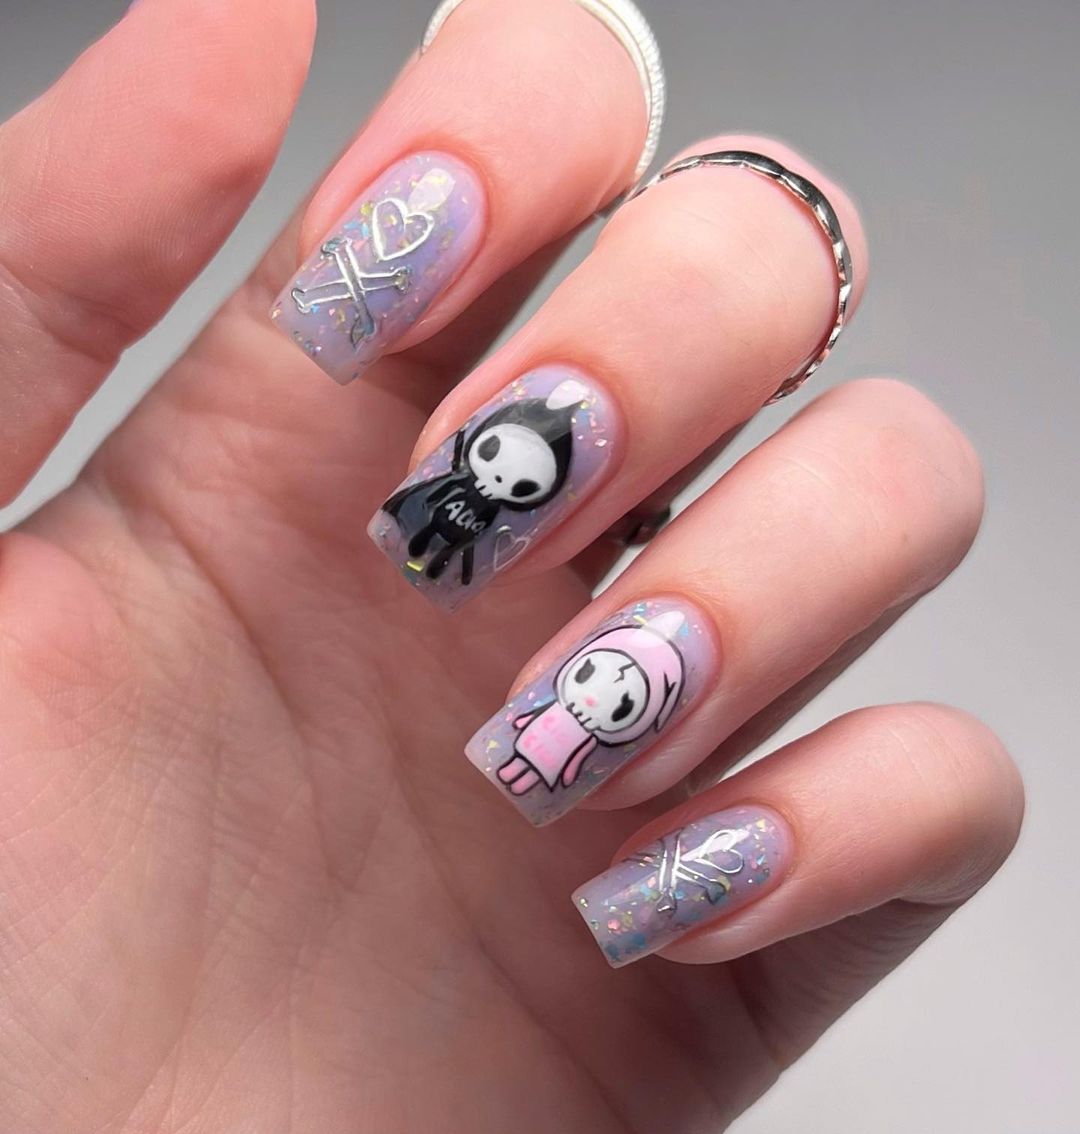 Nail goals unlocked! 🔓 These #tokidoki themed nails are too cute for words! 💅💗 Thank you @/alyastra_nailart (IG) for sharing 💕